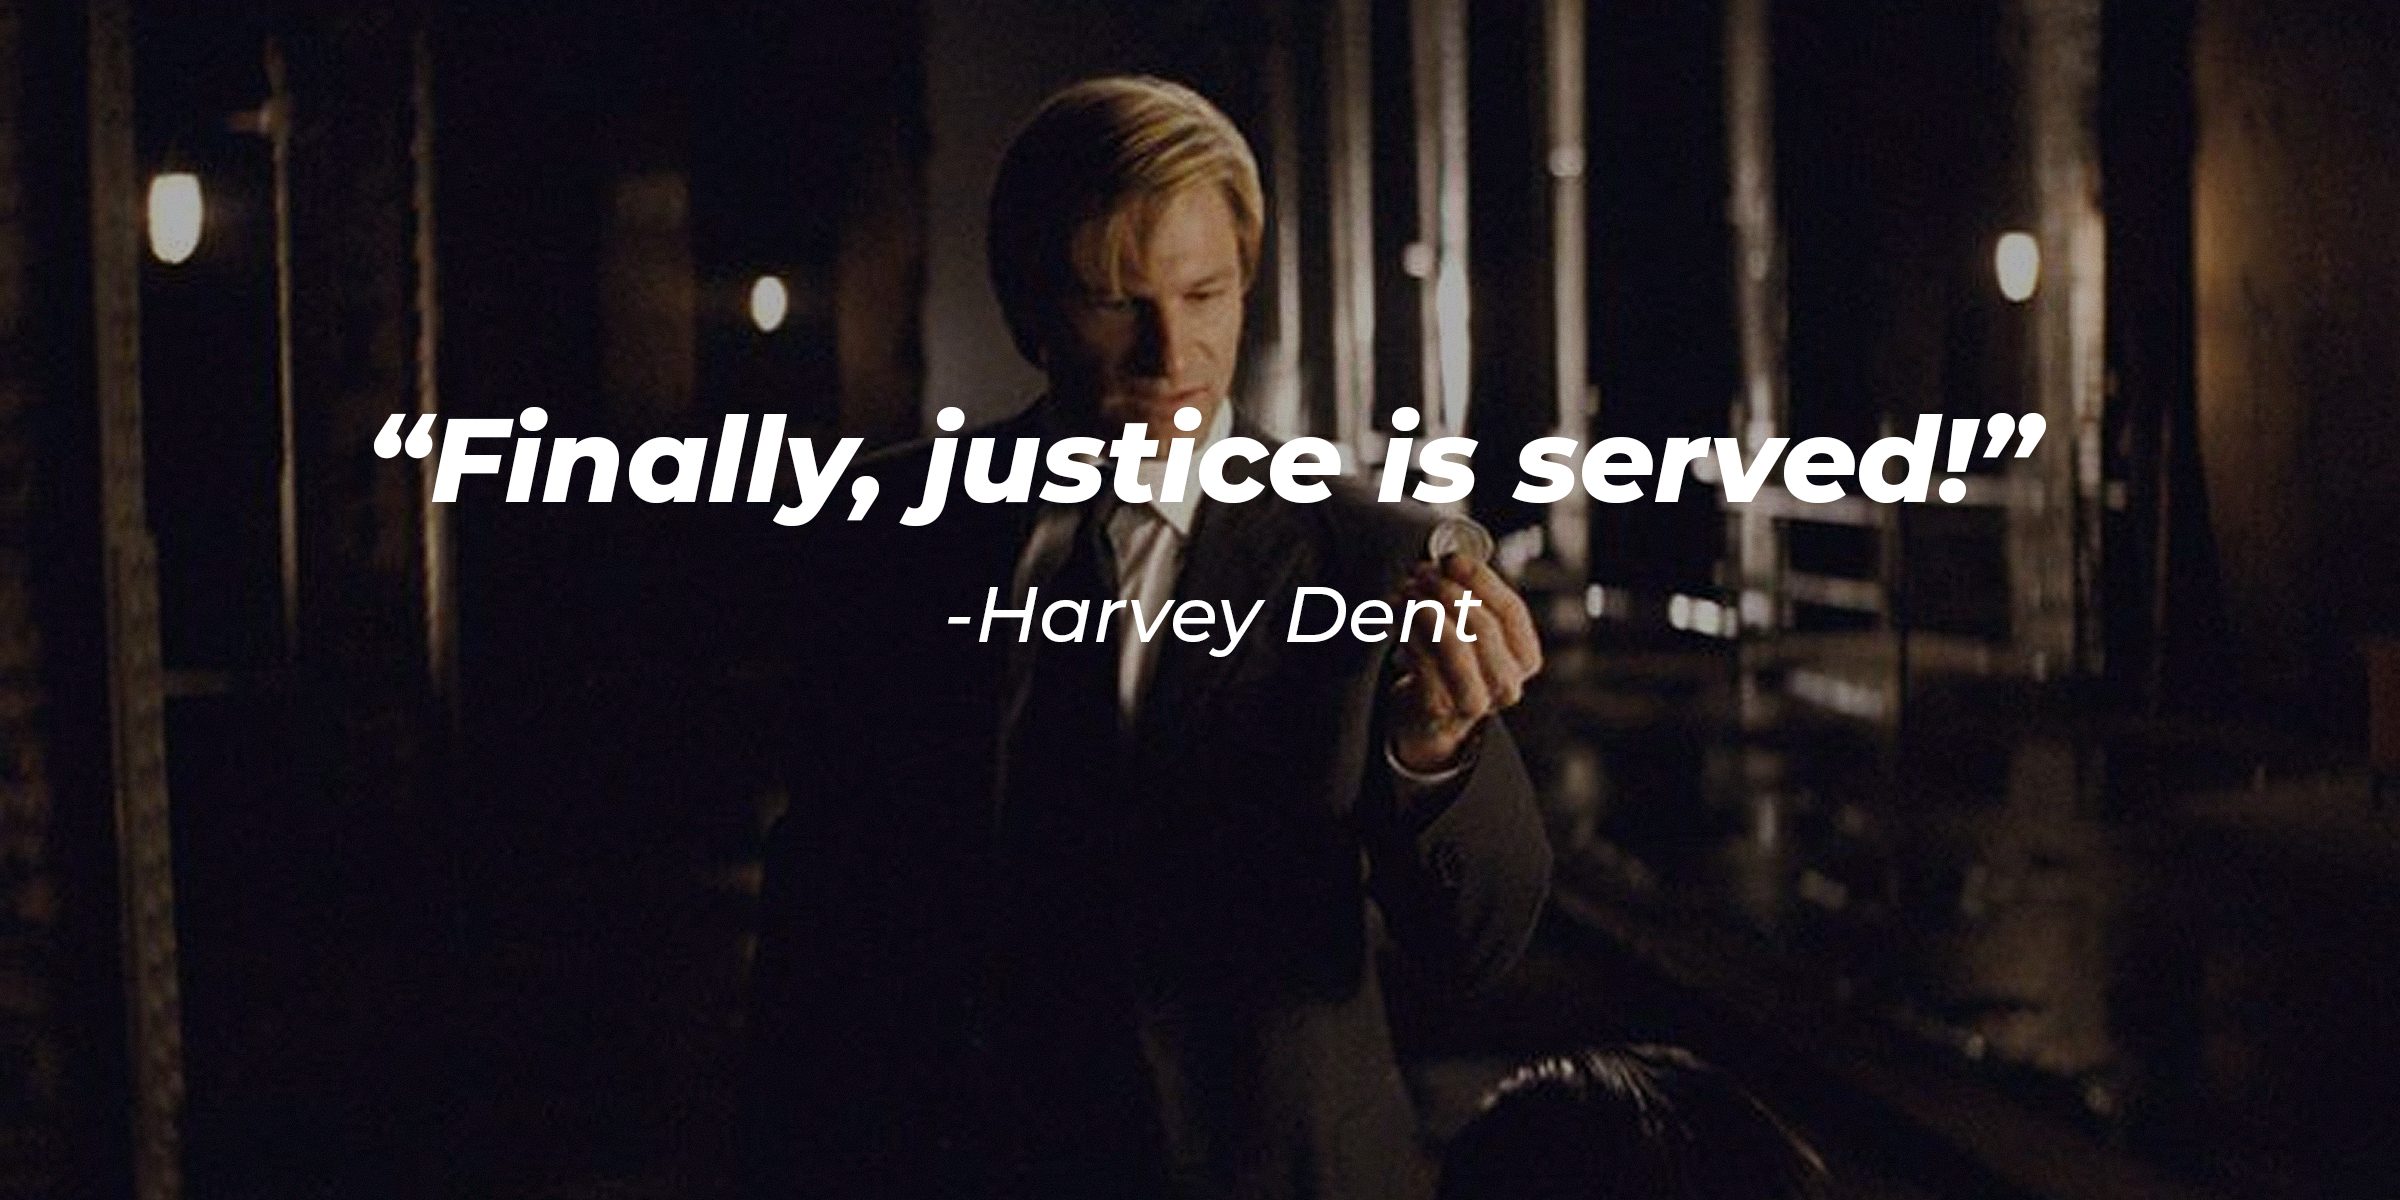 A photo of Harvey Dent with Harvey Dent's quote: “Finally, justice is served!” | Source: facebook.com/darkknighttrilogy